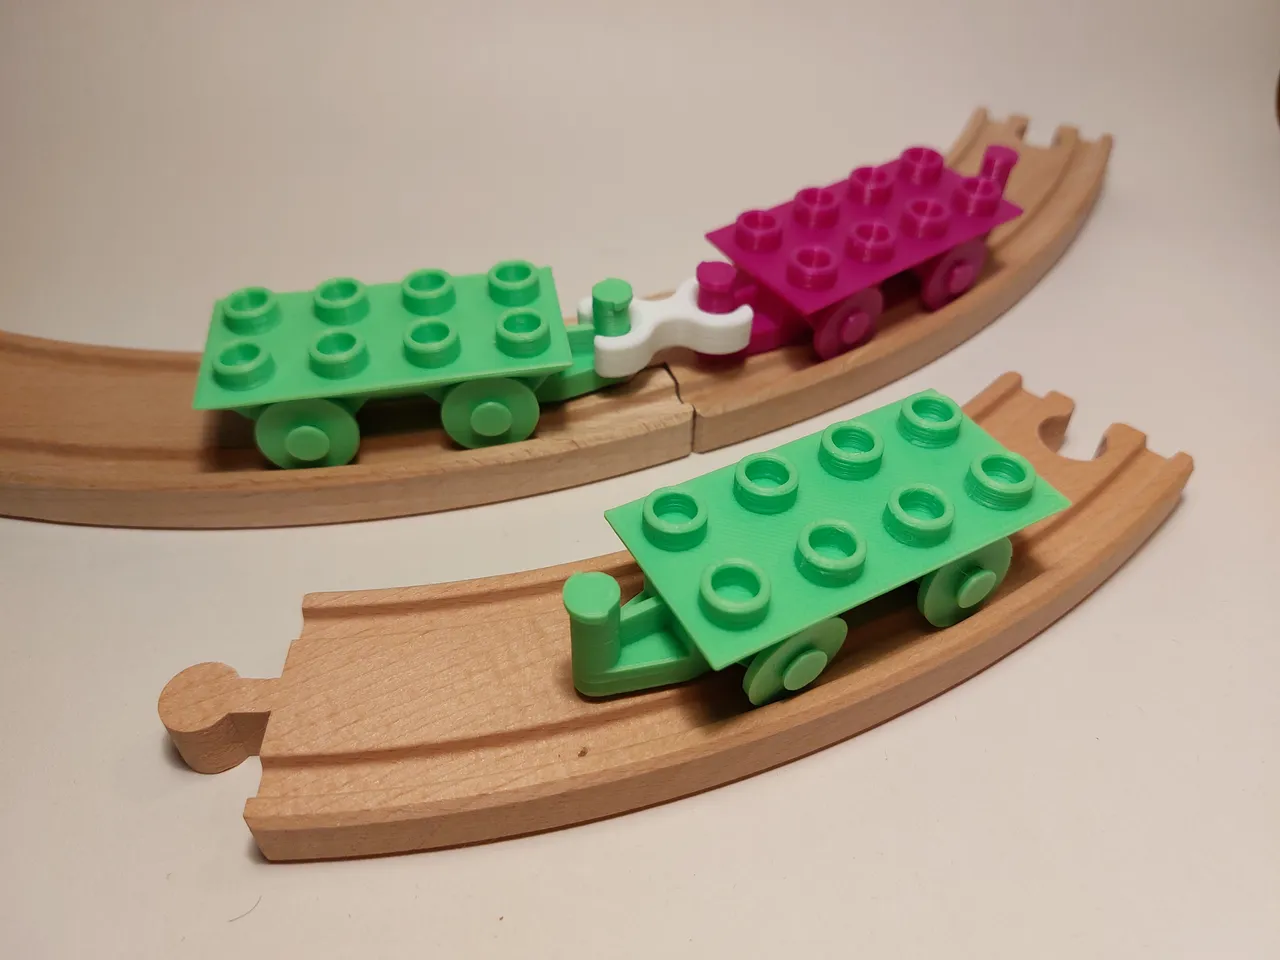 Duplo/Brio Car (for Wooden Train Tracks) with coupler system by